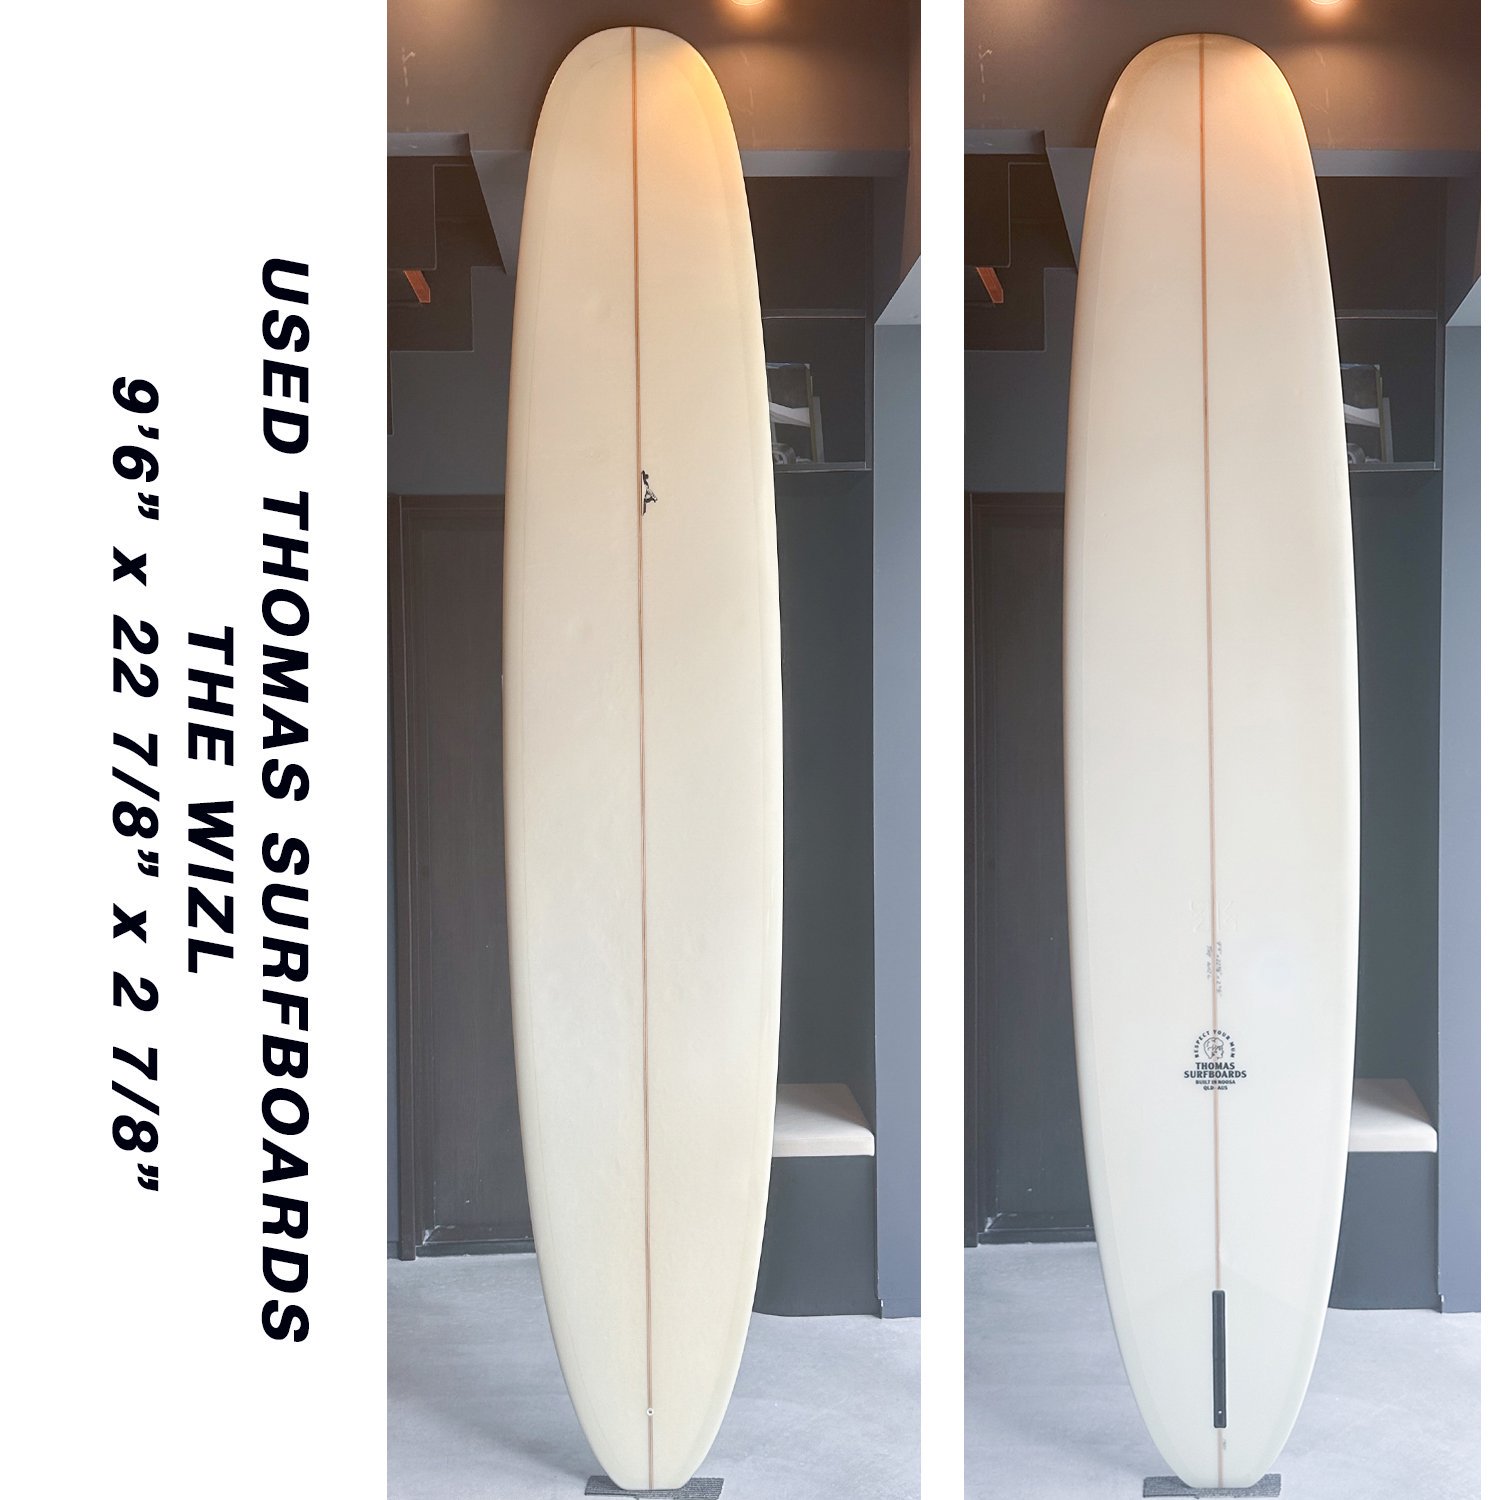 <img class='new_mark_img1' src='https://img.shop-pro.jp/img/new/icons14.gif' style='border:none;display:inline;margin:0px;padding:0px;width:auto;' />USED BOARDThomas surfboards "THE WIZL" 9'6" ()